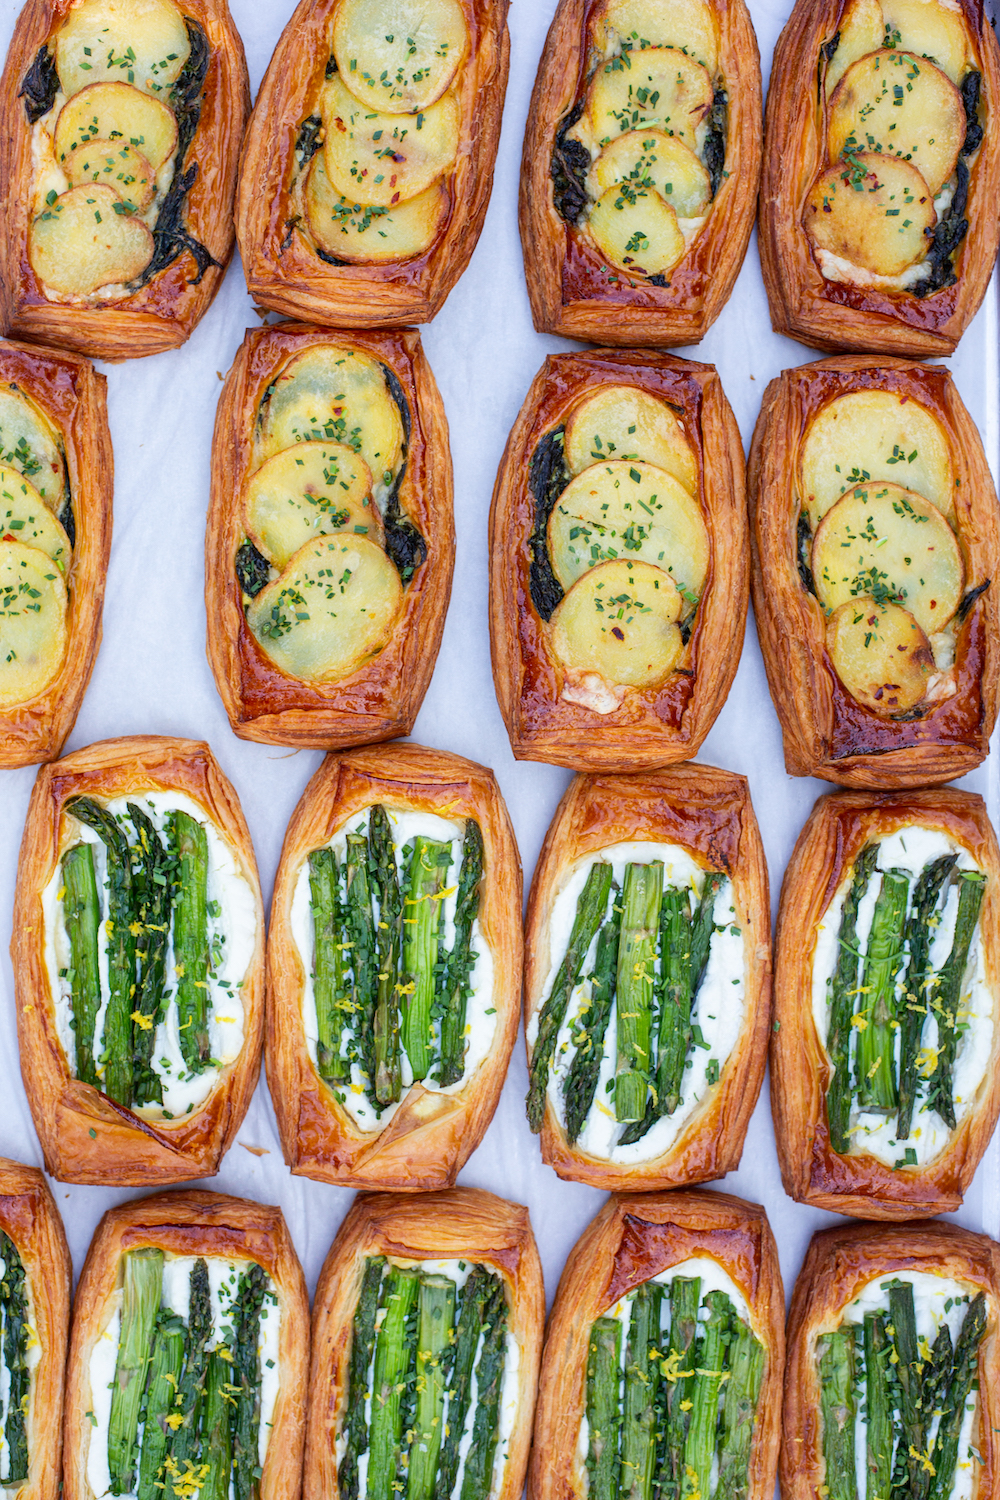 Pastries with potatoes and asparagus on top from San Diego bakery Wayfarer Bread in La Jolla